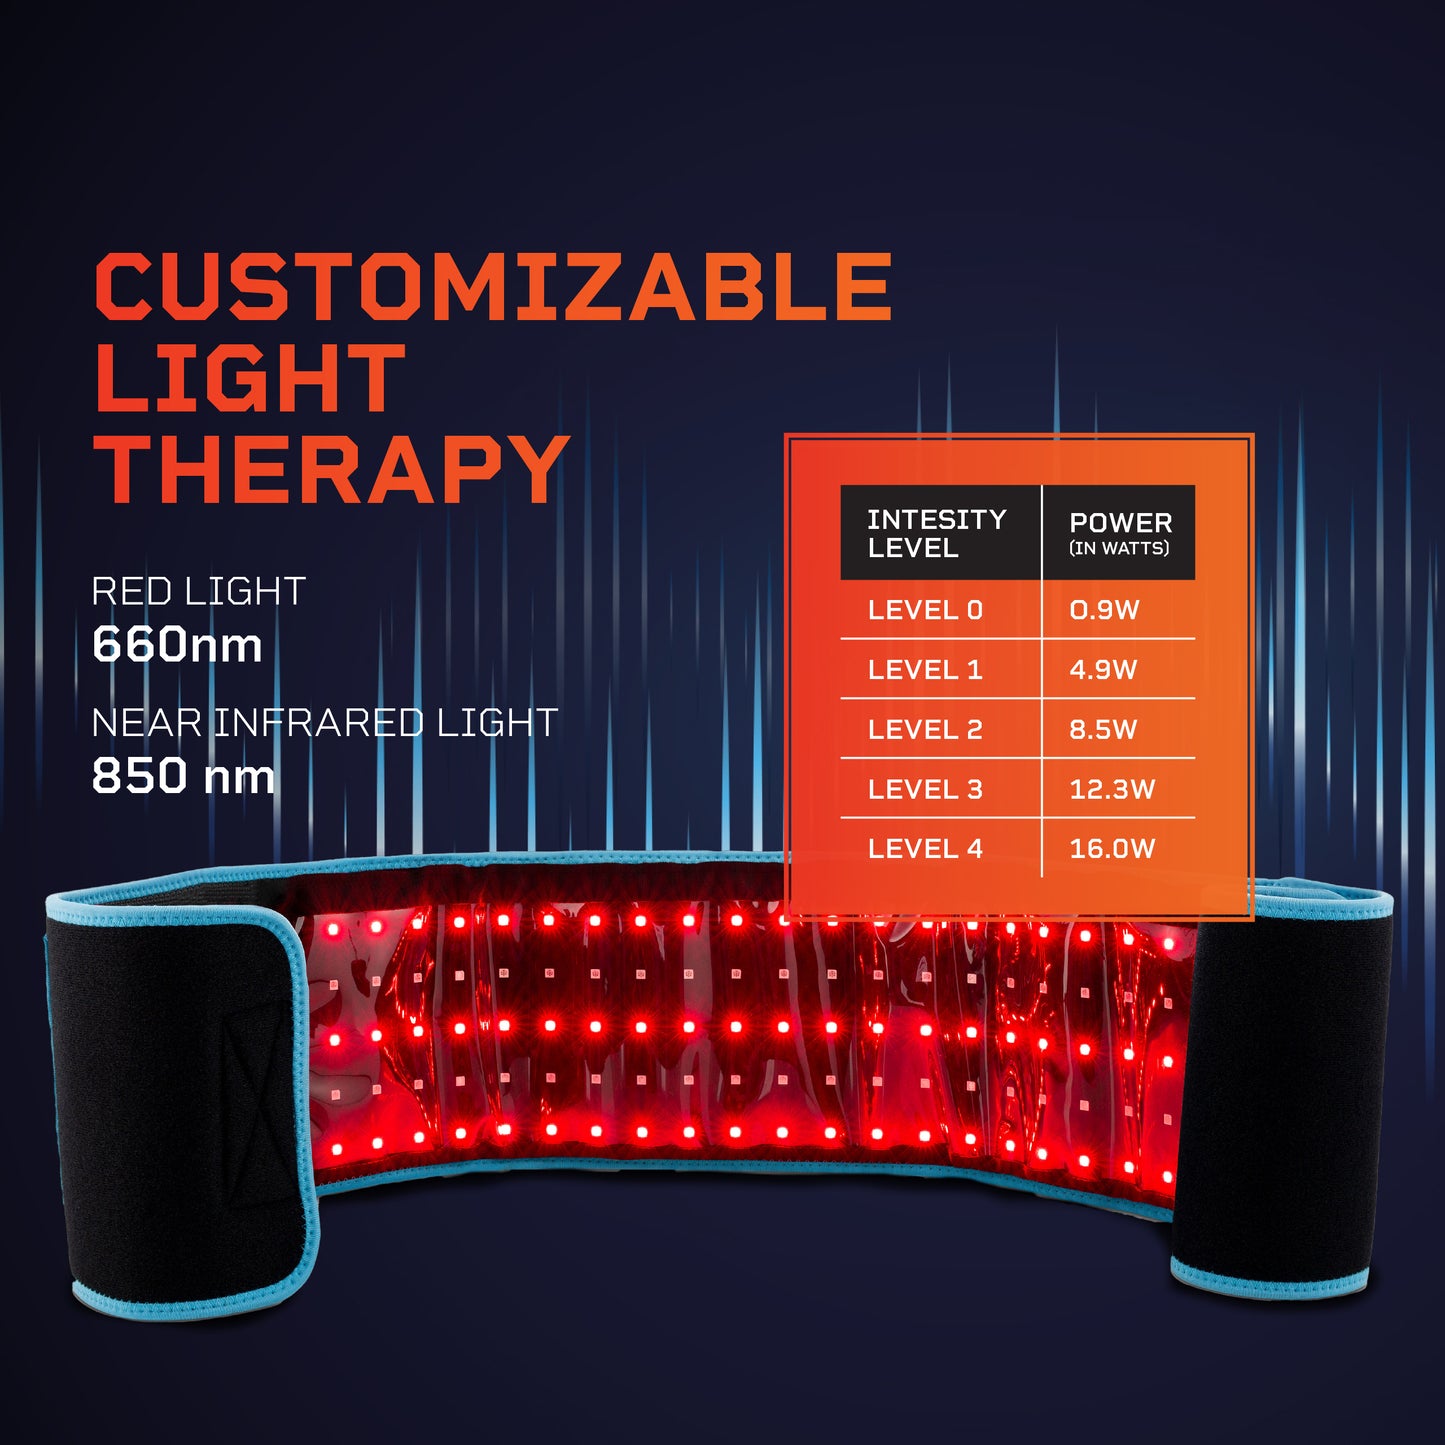 Lifepro Red Light Therapy Belt - Near Infrared Light Therapy & Red Light Therapy for Body, Relaxing Muscle, Inflammation, Improve Circulation - Infrared Therapy or Infrared Light Therapy Device